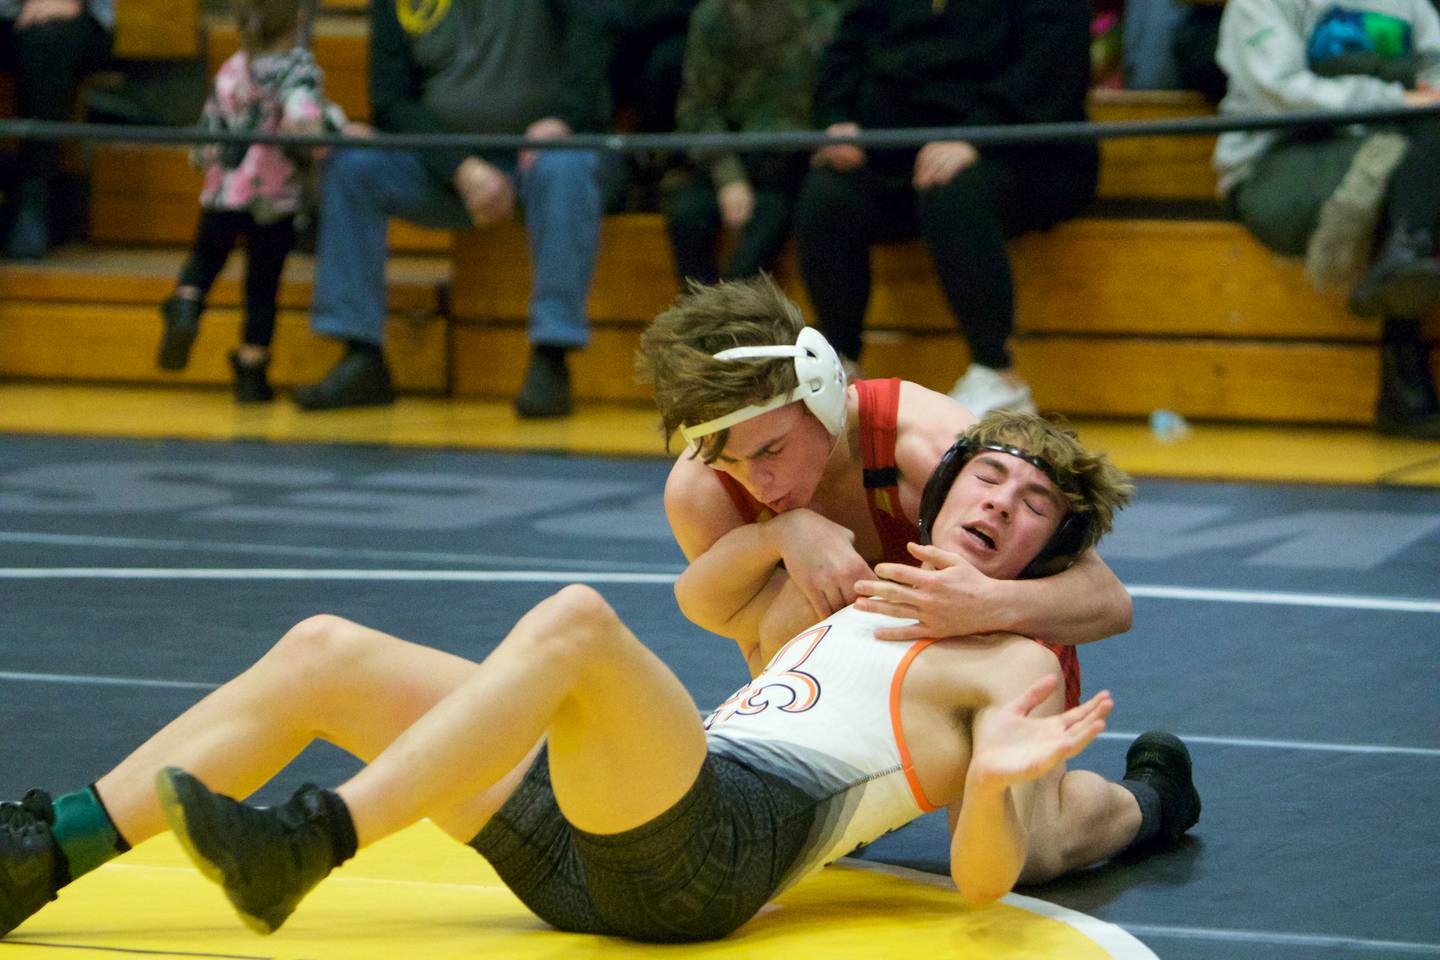 Batavia's Cael Andrews wrestles St. Charles East's Gavin Connolly  in the 145-pound Championship round at the DuKane Conference at Glenbard North on Jan. 29, 2022 in Carol Stream.